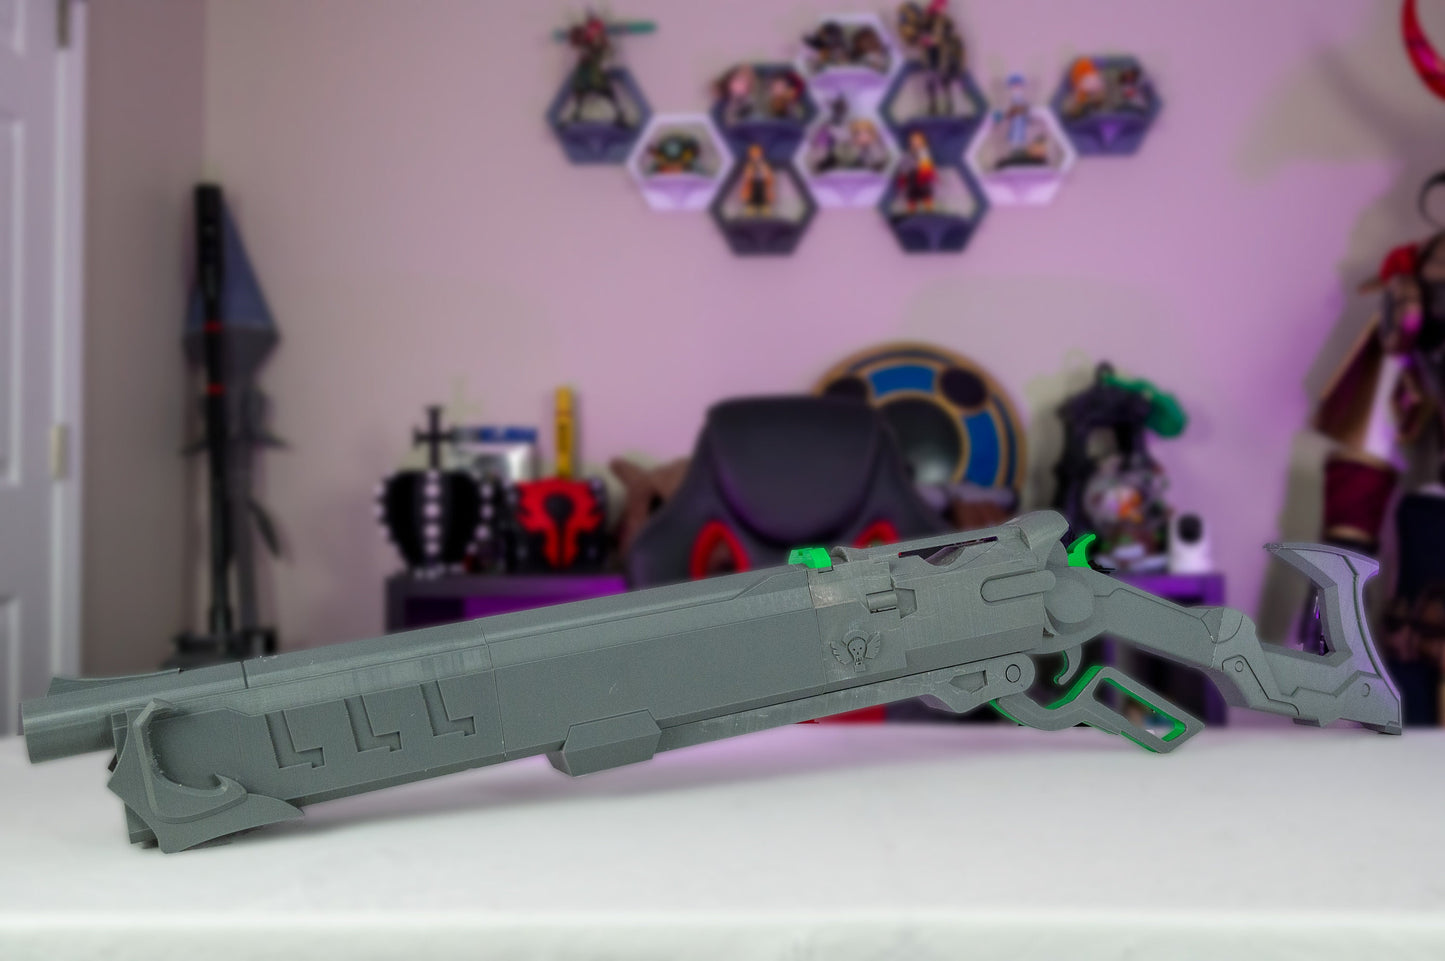 Full Sized Viper Overwatch Cosplay Prop 3D Printed